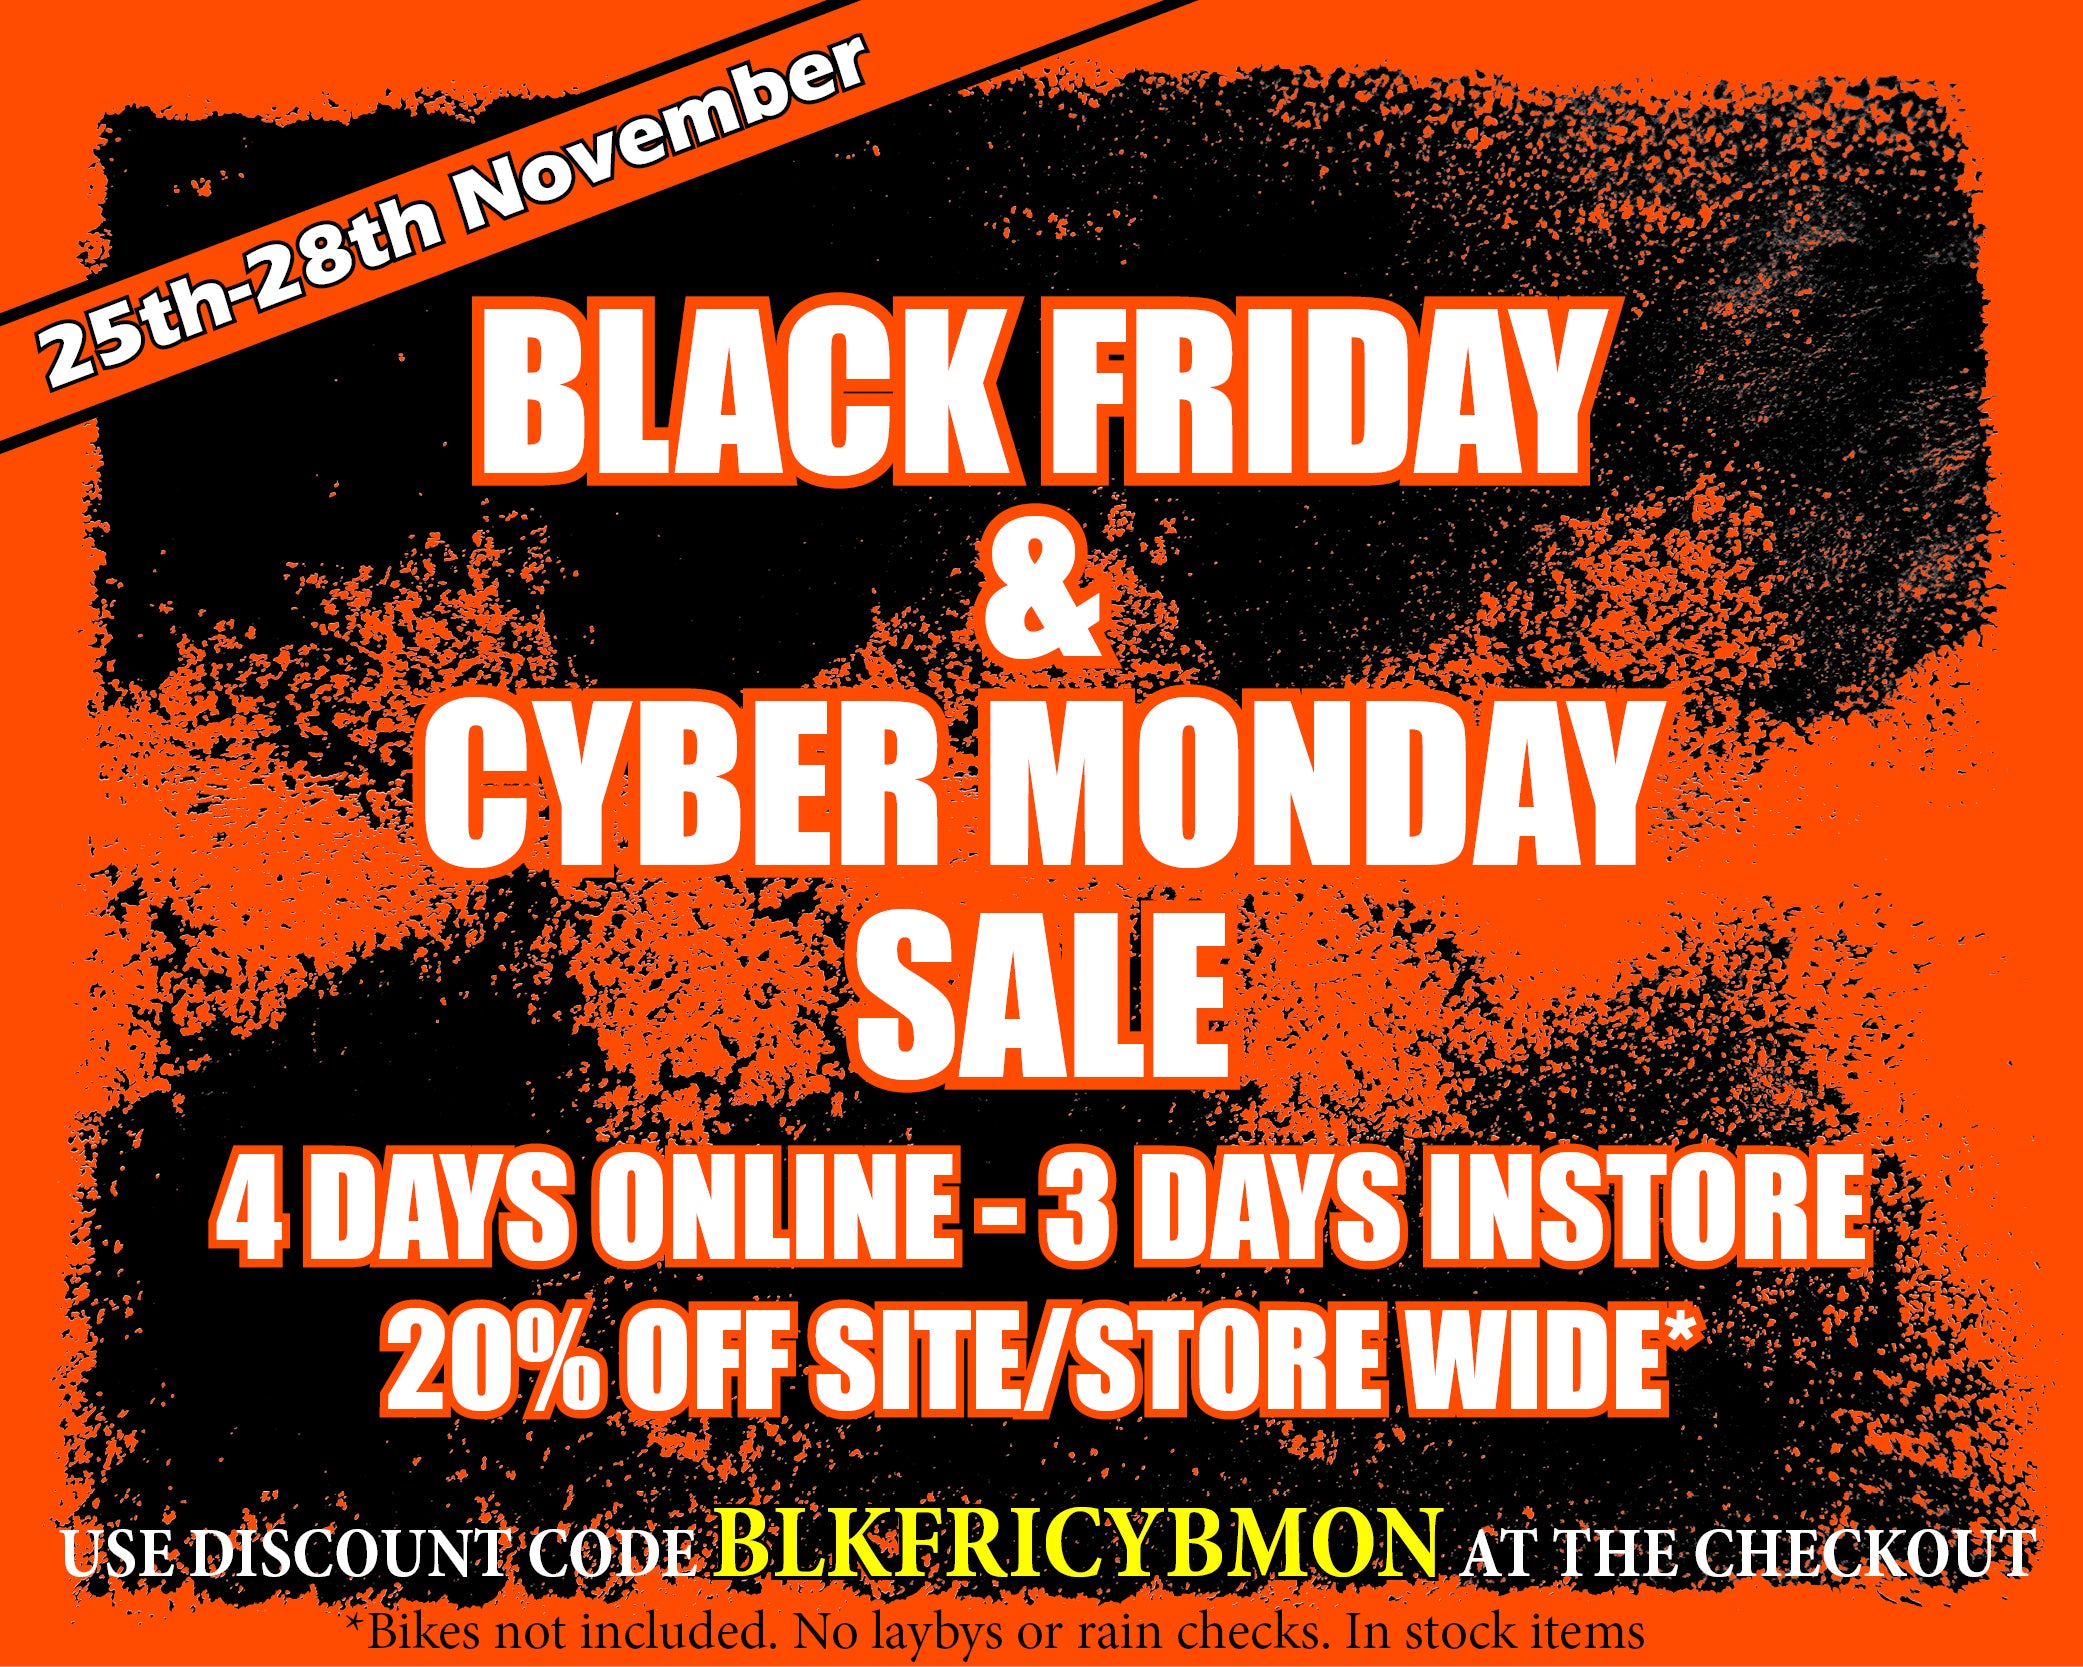 Black Friday and Cyber Monday SALE